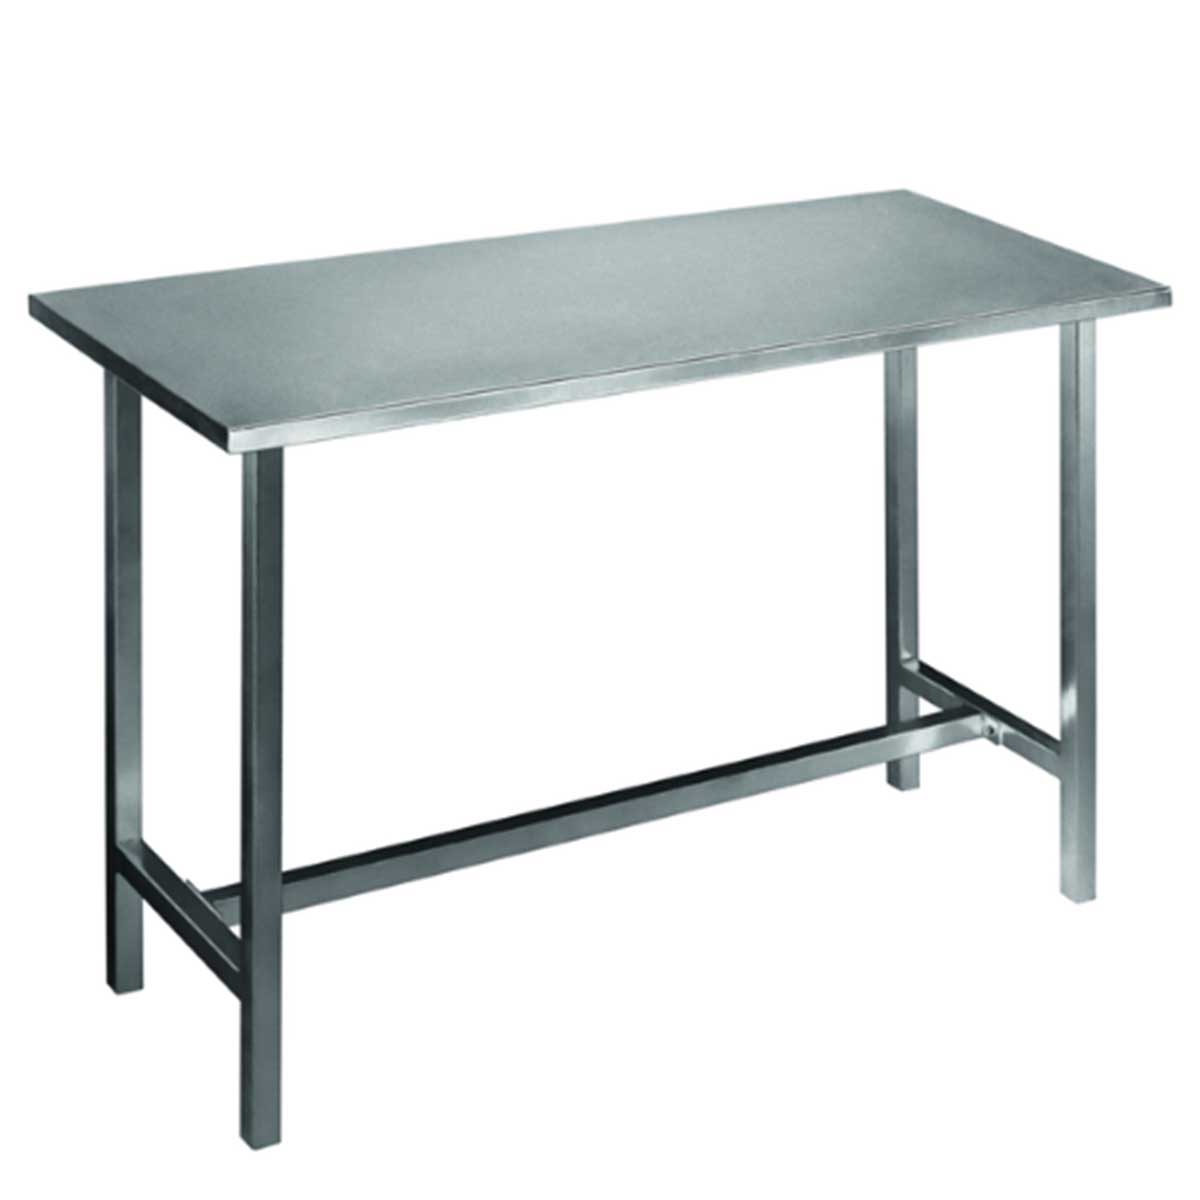 Metal Office Table Manufacturers, Suppliers in Jamia Nagar